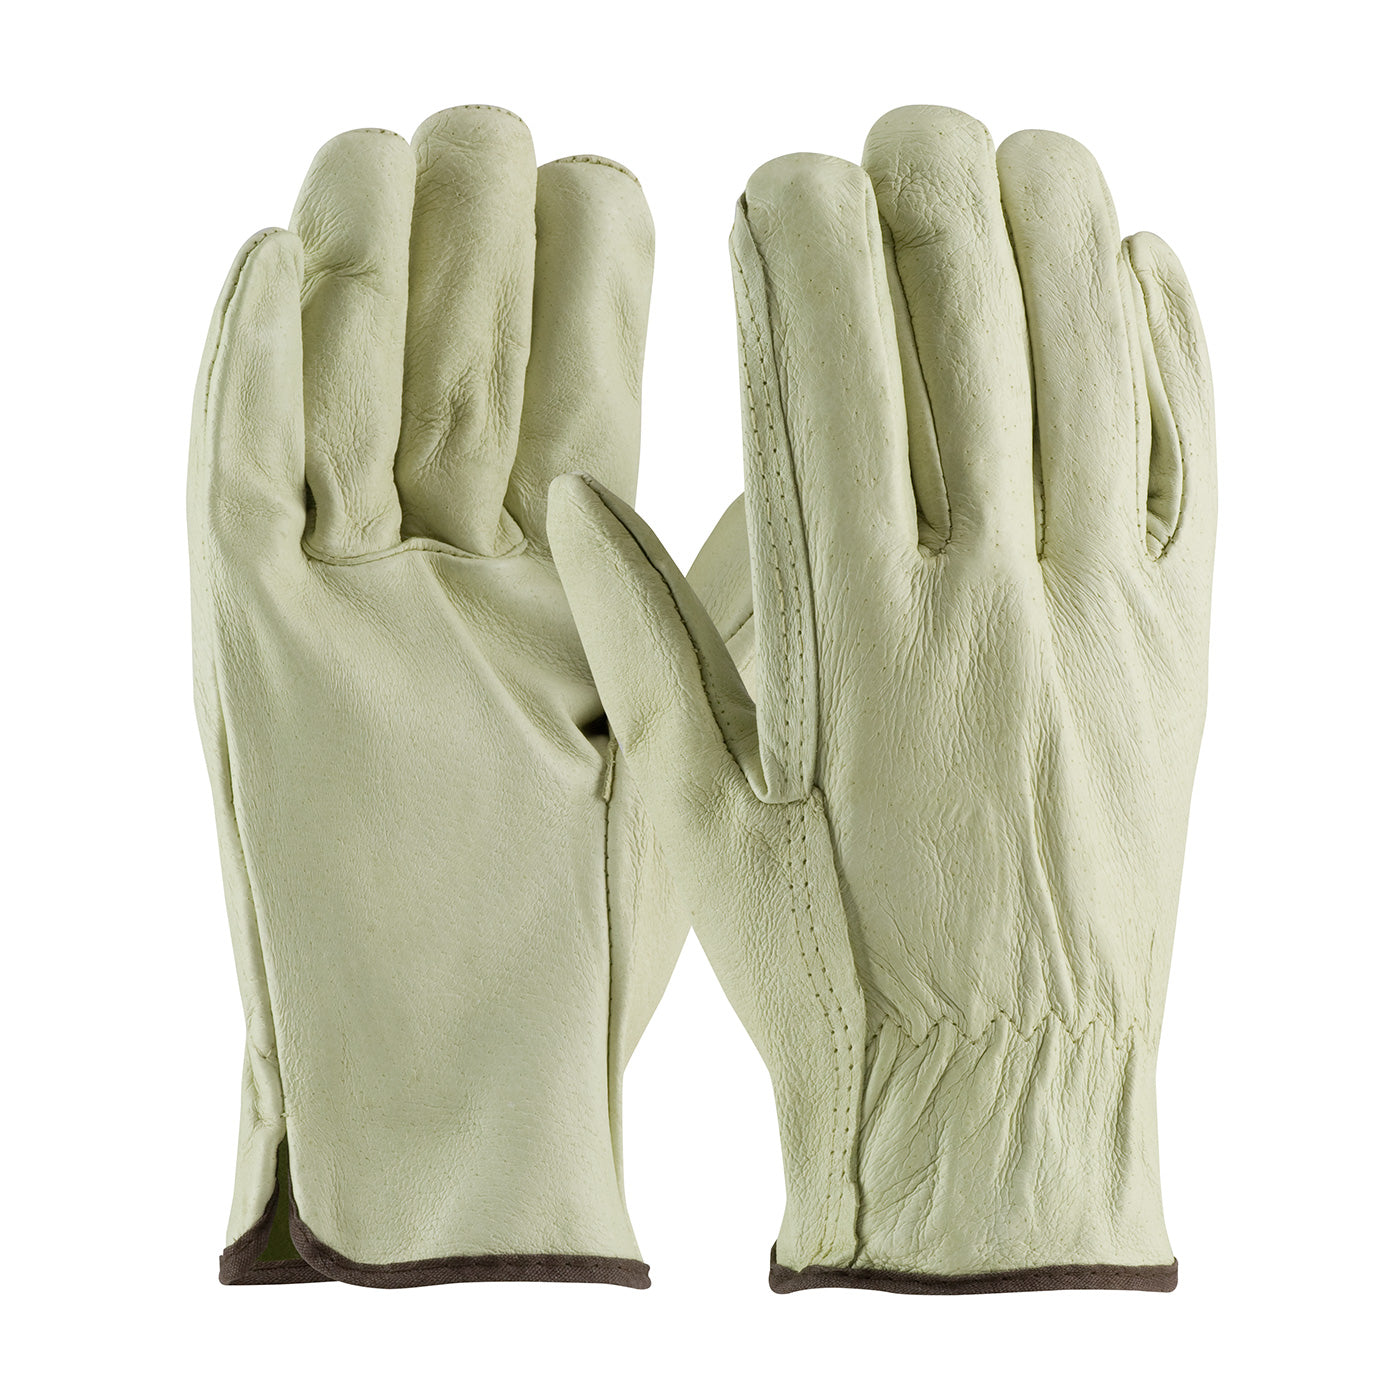 West Chester 994/S Regular Grade Top Grain Pigskin Leather Drivers Glove - Straight Thumb